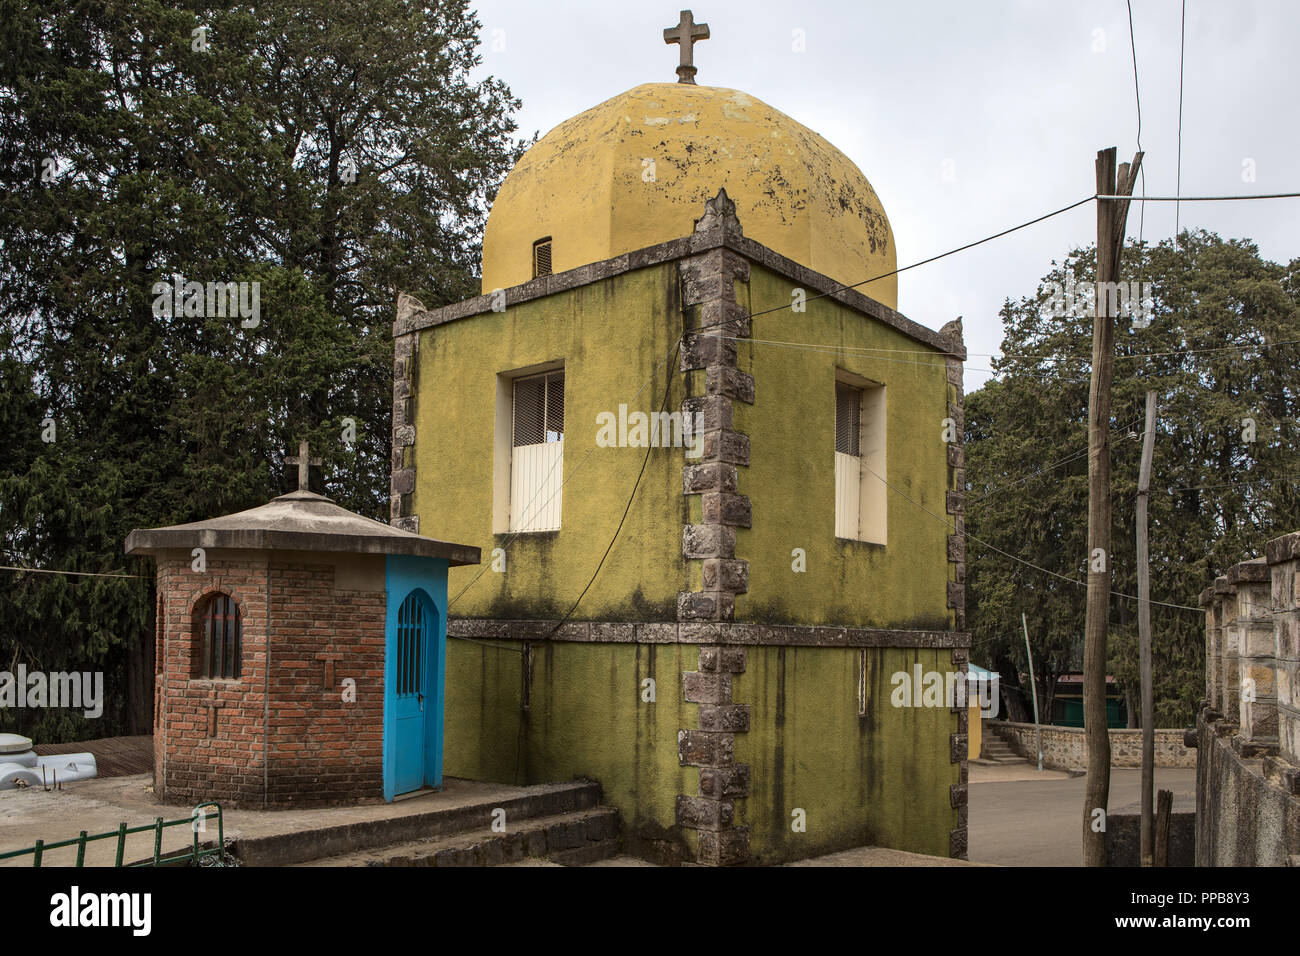 Bell tower, Maryam or St. Mary's Church, Mount Entoto, Addis Ababa, Ethiopia Stock Photo